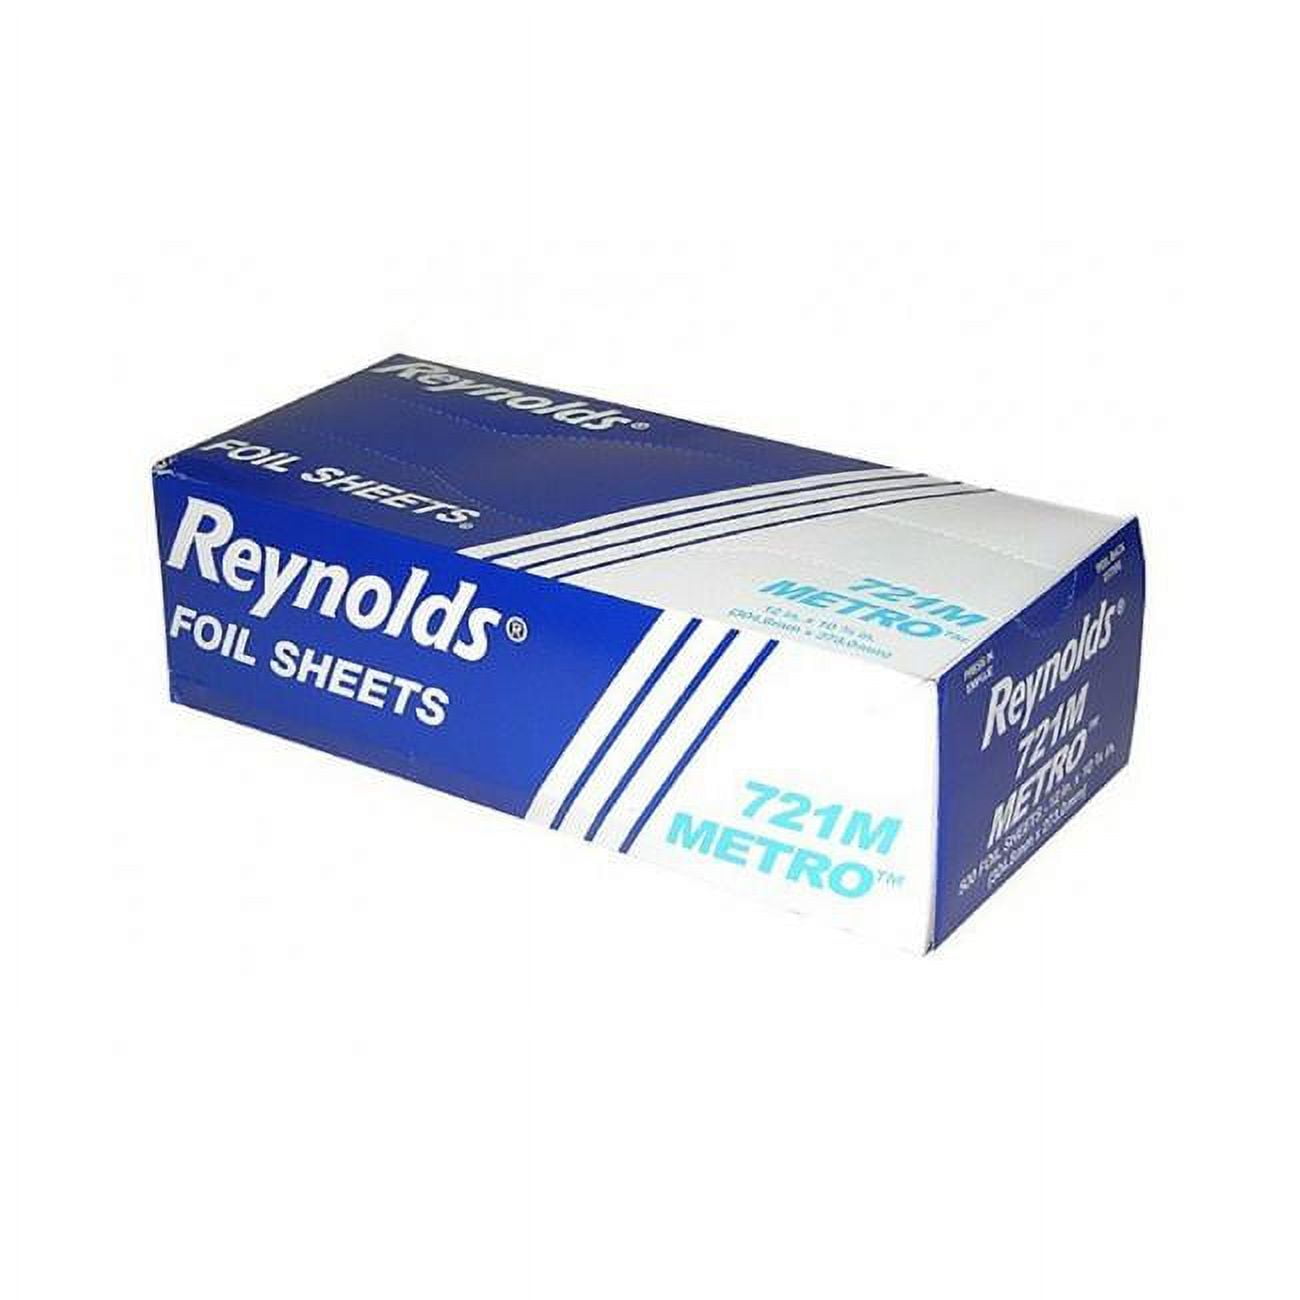 Reynolds 721m Cpc 12 X 10.75 In. Metro Interfolded Aluminum Foil Sheets - Case Of 3000